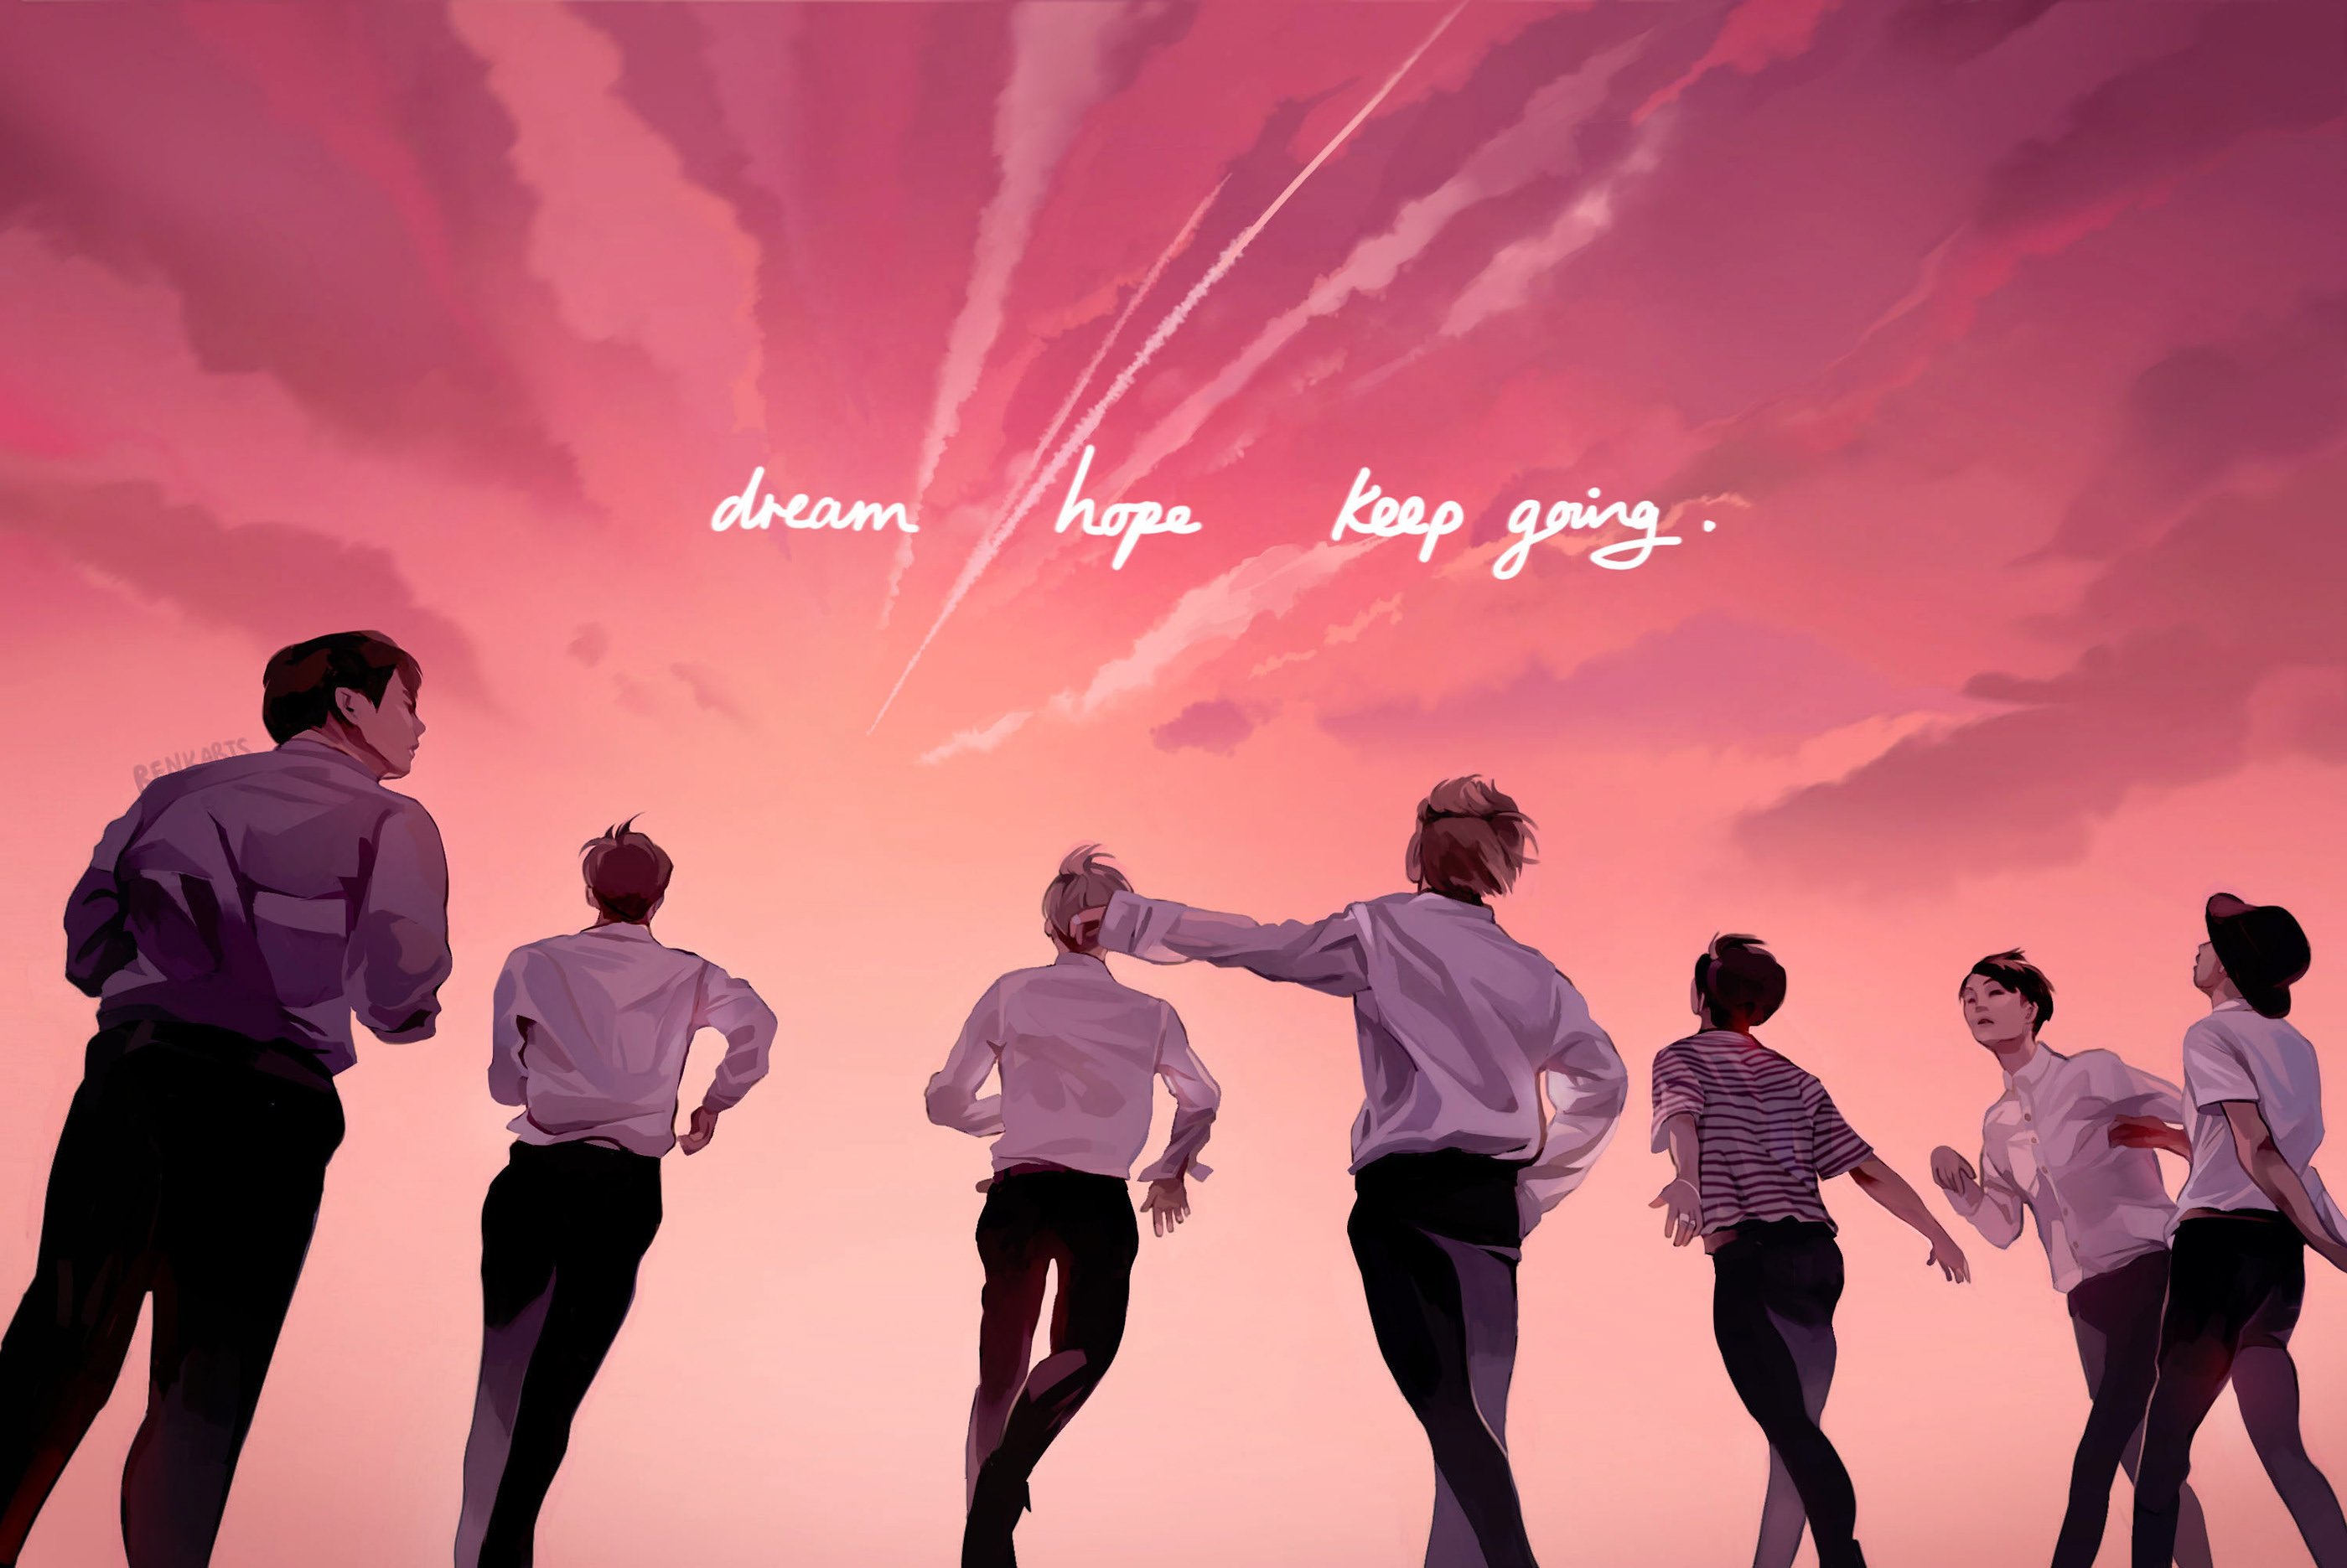 Bts eternal. БТС фон. БТС 1920 768. Young Forever BTS арт. BTS обои.